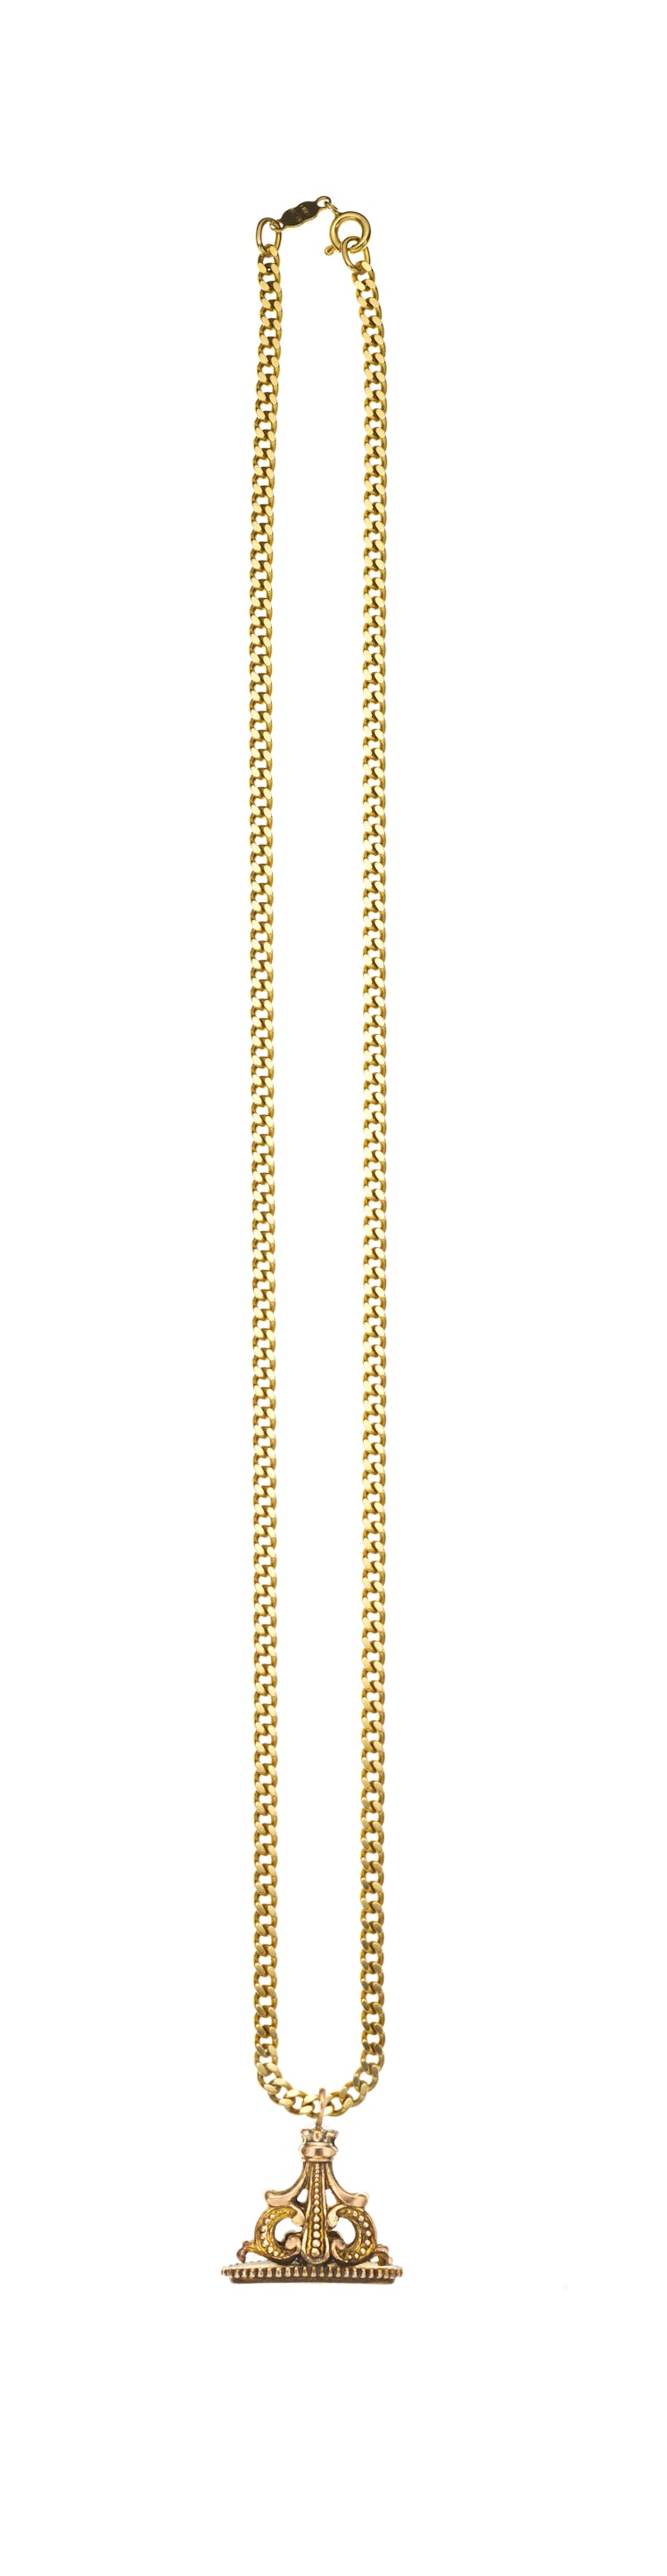 The Row golden chain necklace with pendant.